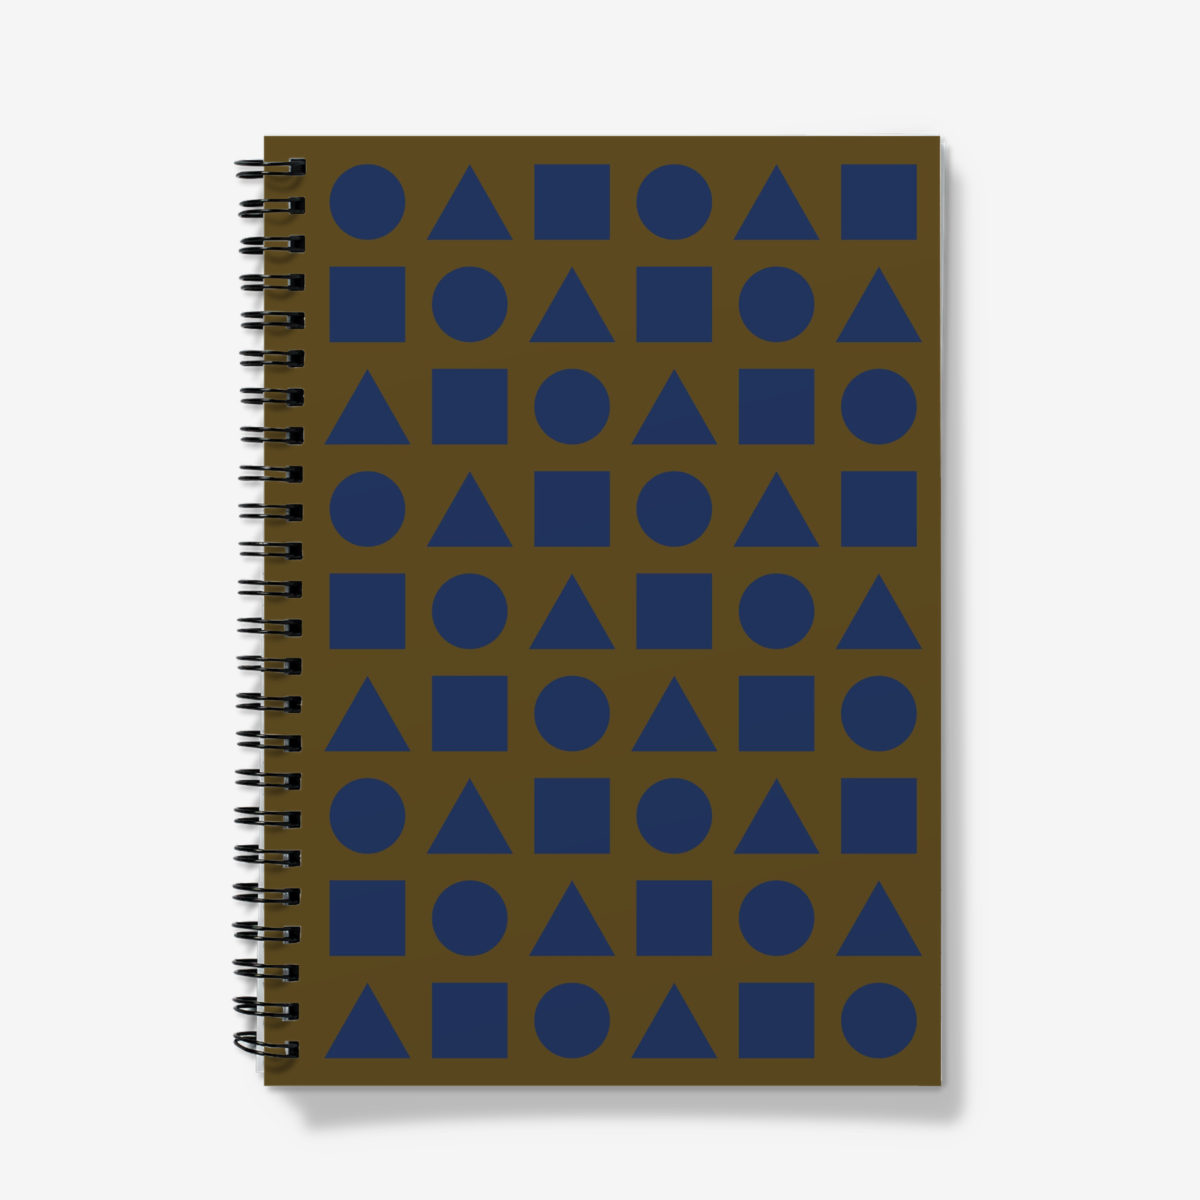 Deep Blue Shapes on Military Green Spiral Notebook